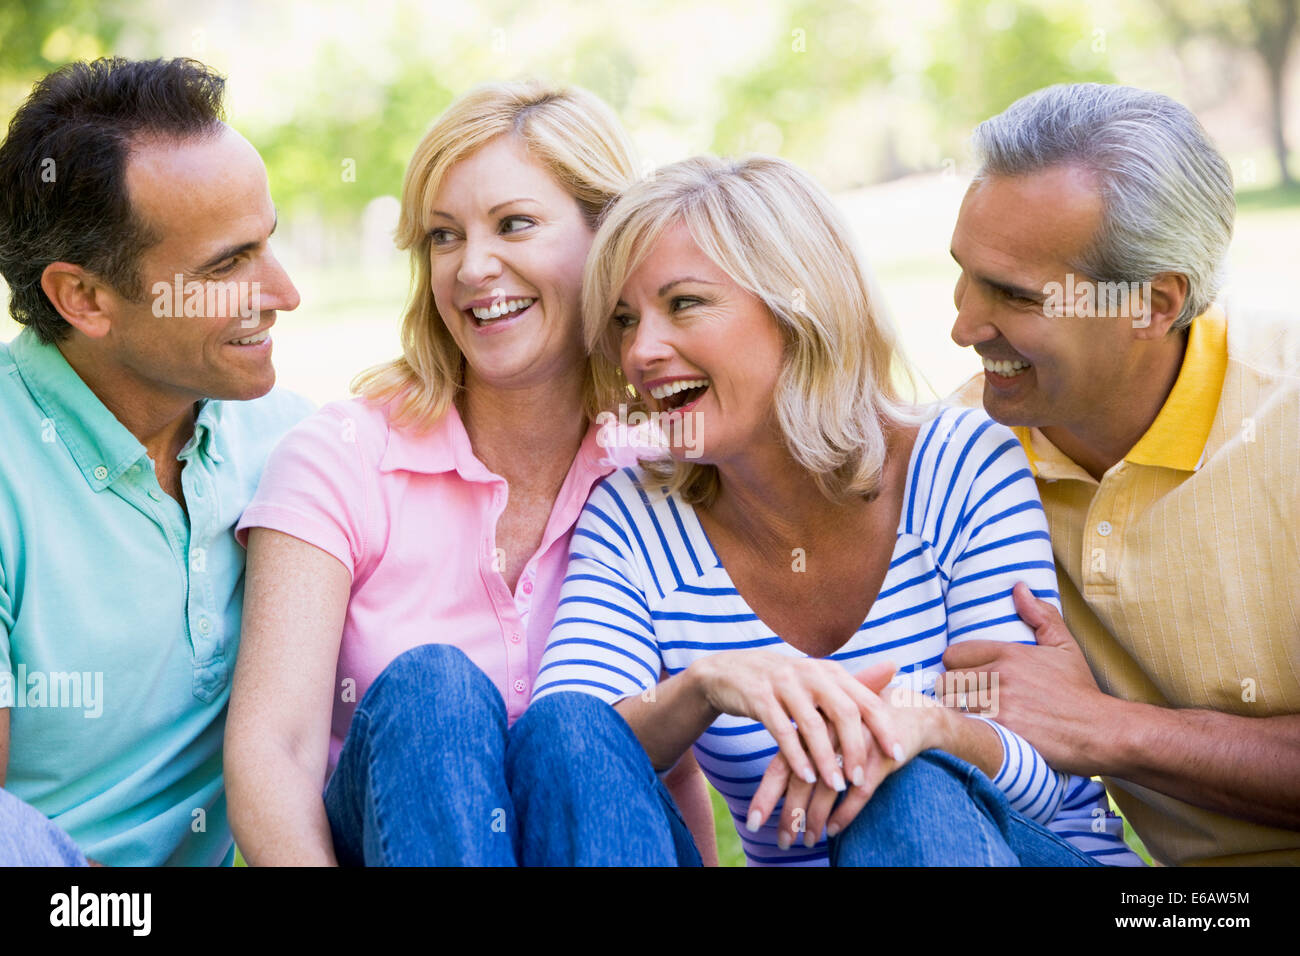 laughing,togetherness,friends Stock Photo